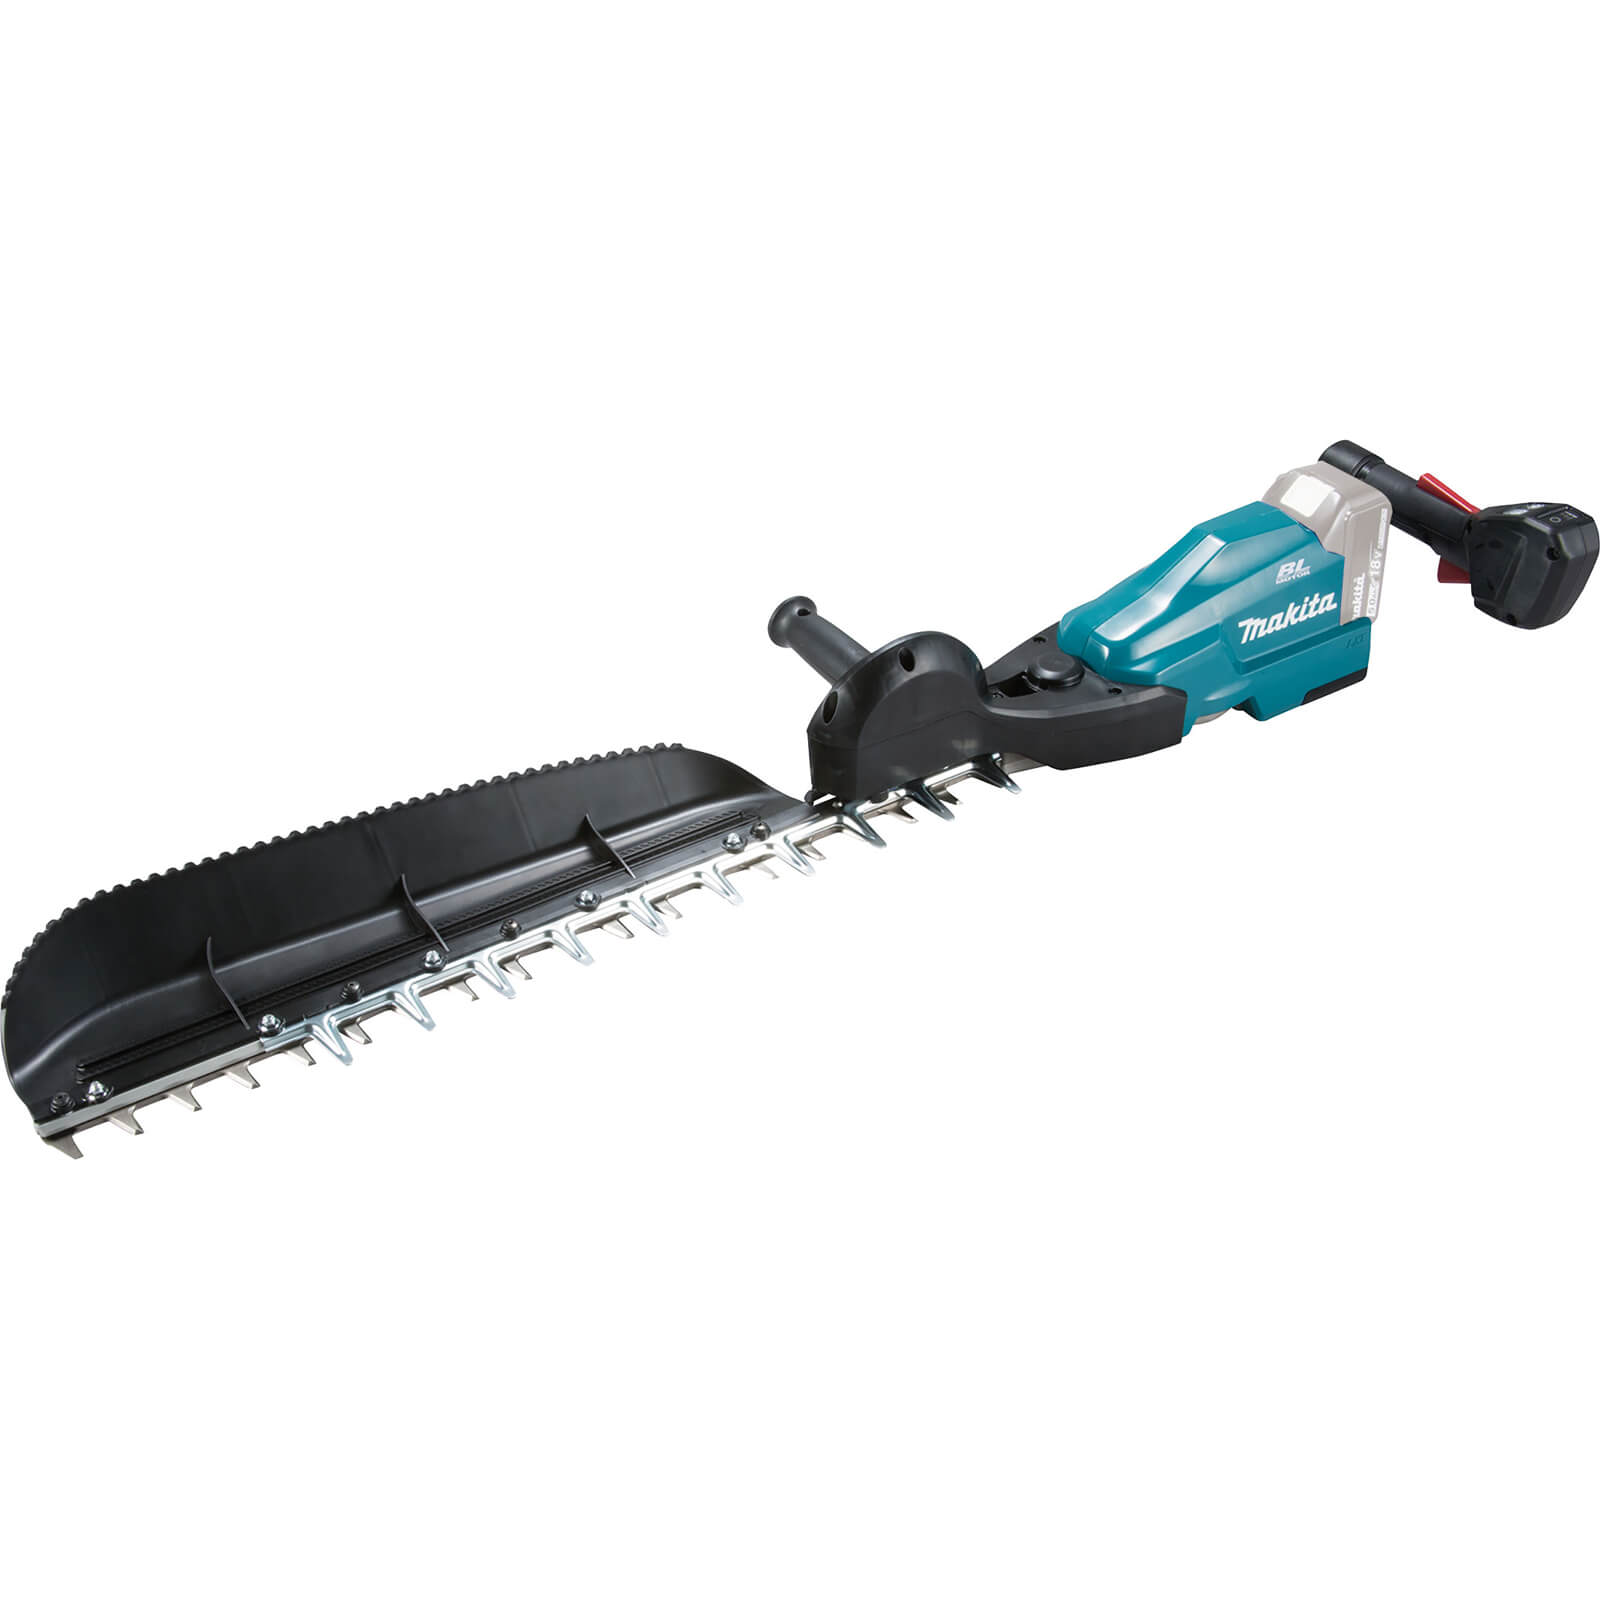 Image of Makita DUH604S 18v LXT Cordless Brushless Hedge Trimmer 600mm No Batteries No Charger